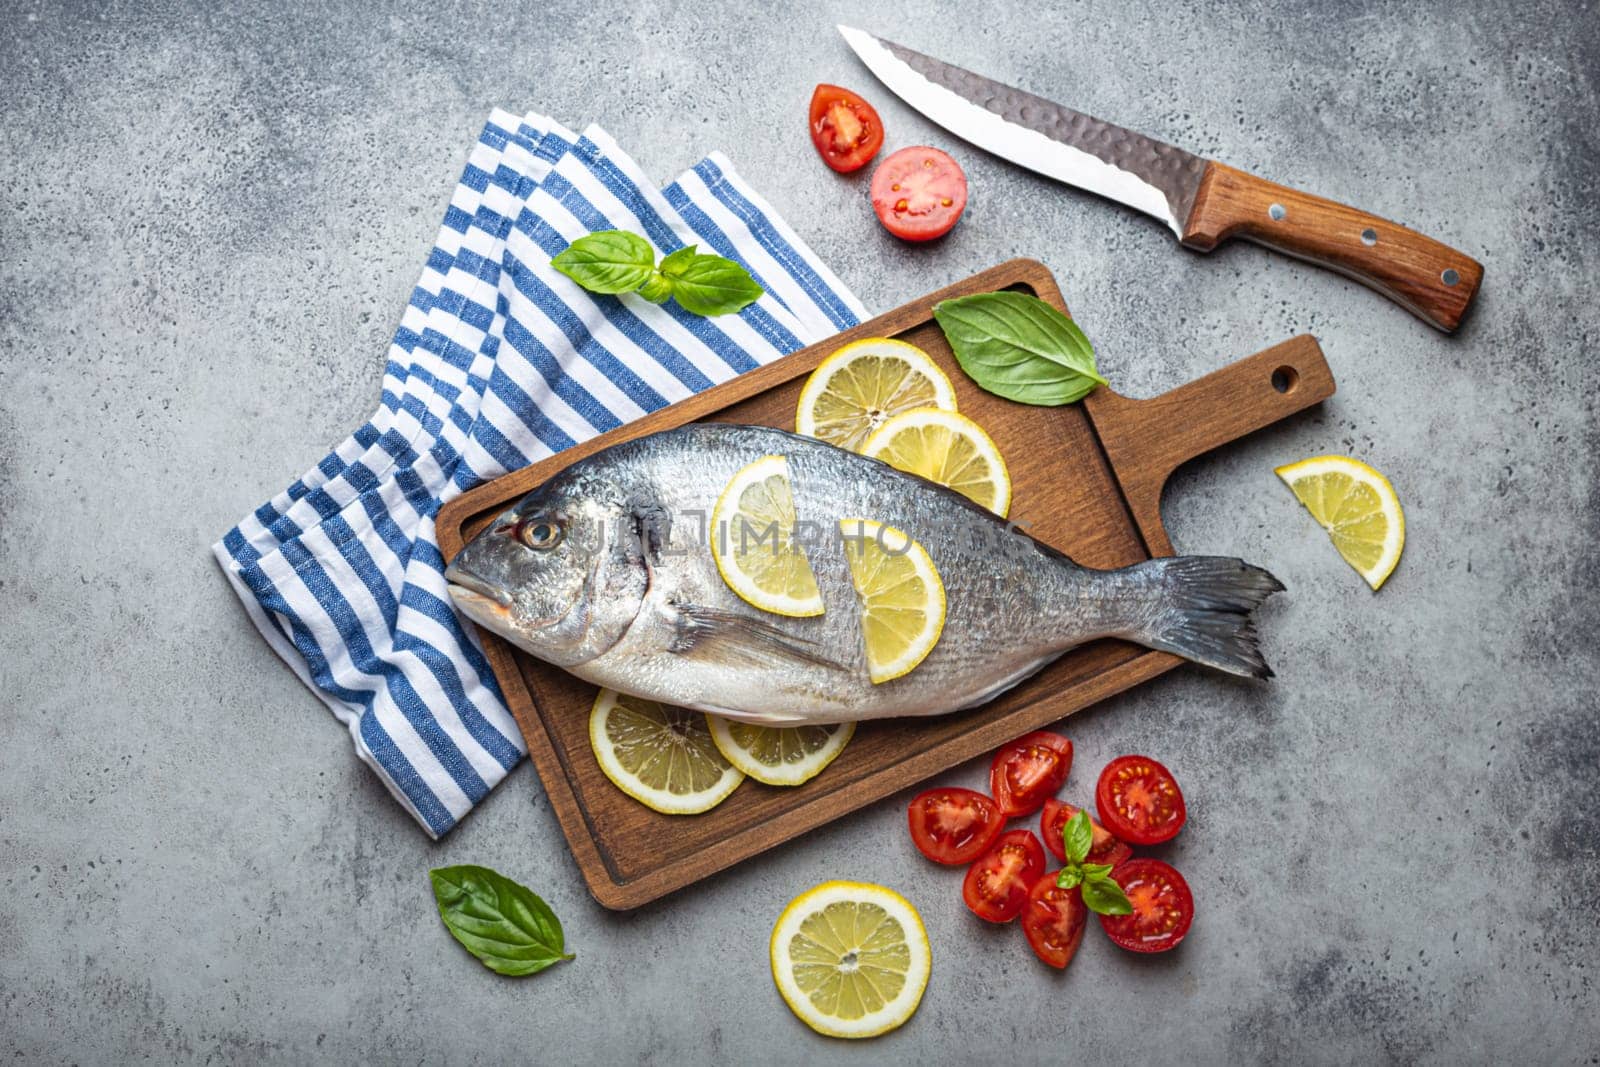 Raw uncooked fish dorado with ingredients lemon, fresh basil, cut cherry tomatoes on wooden cutting board with knife on rustic stone background top view, cooking healthy fish dorado concept